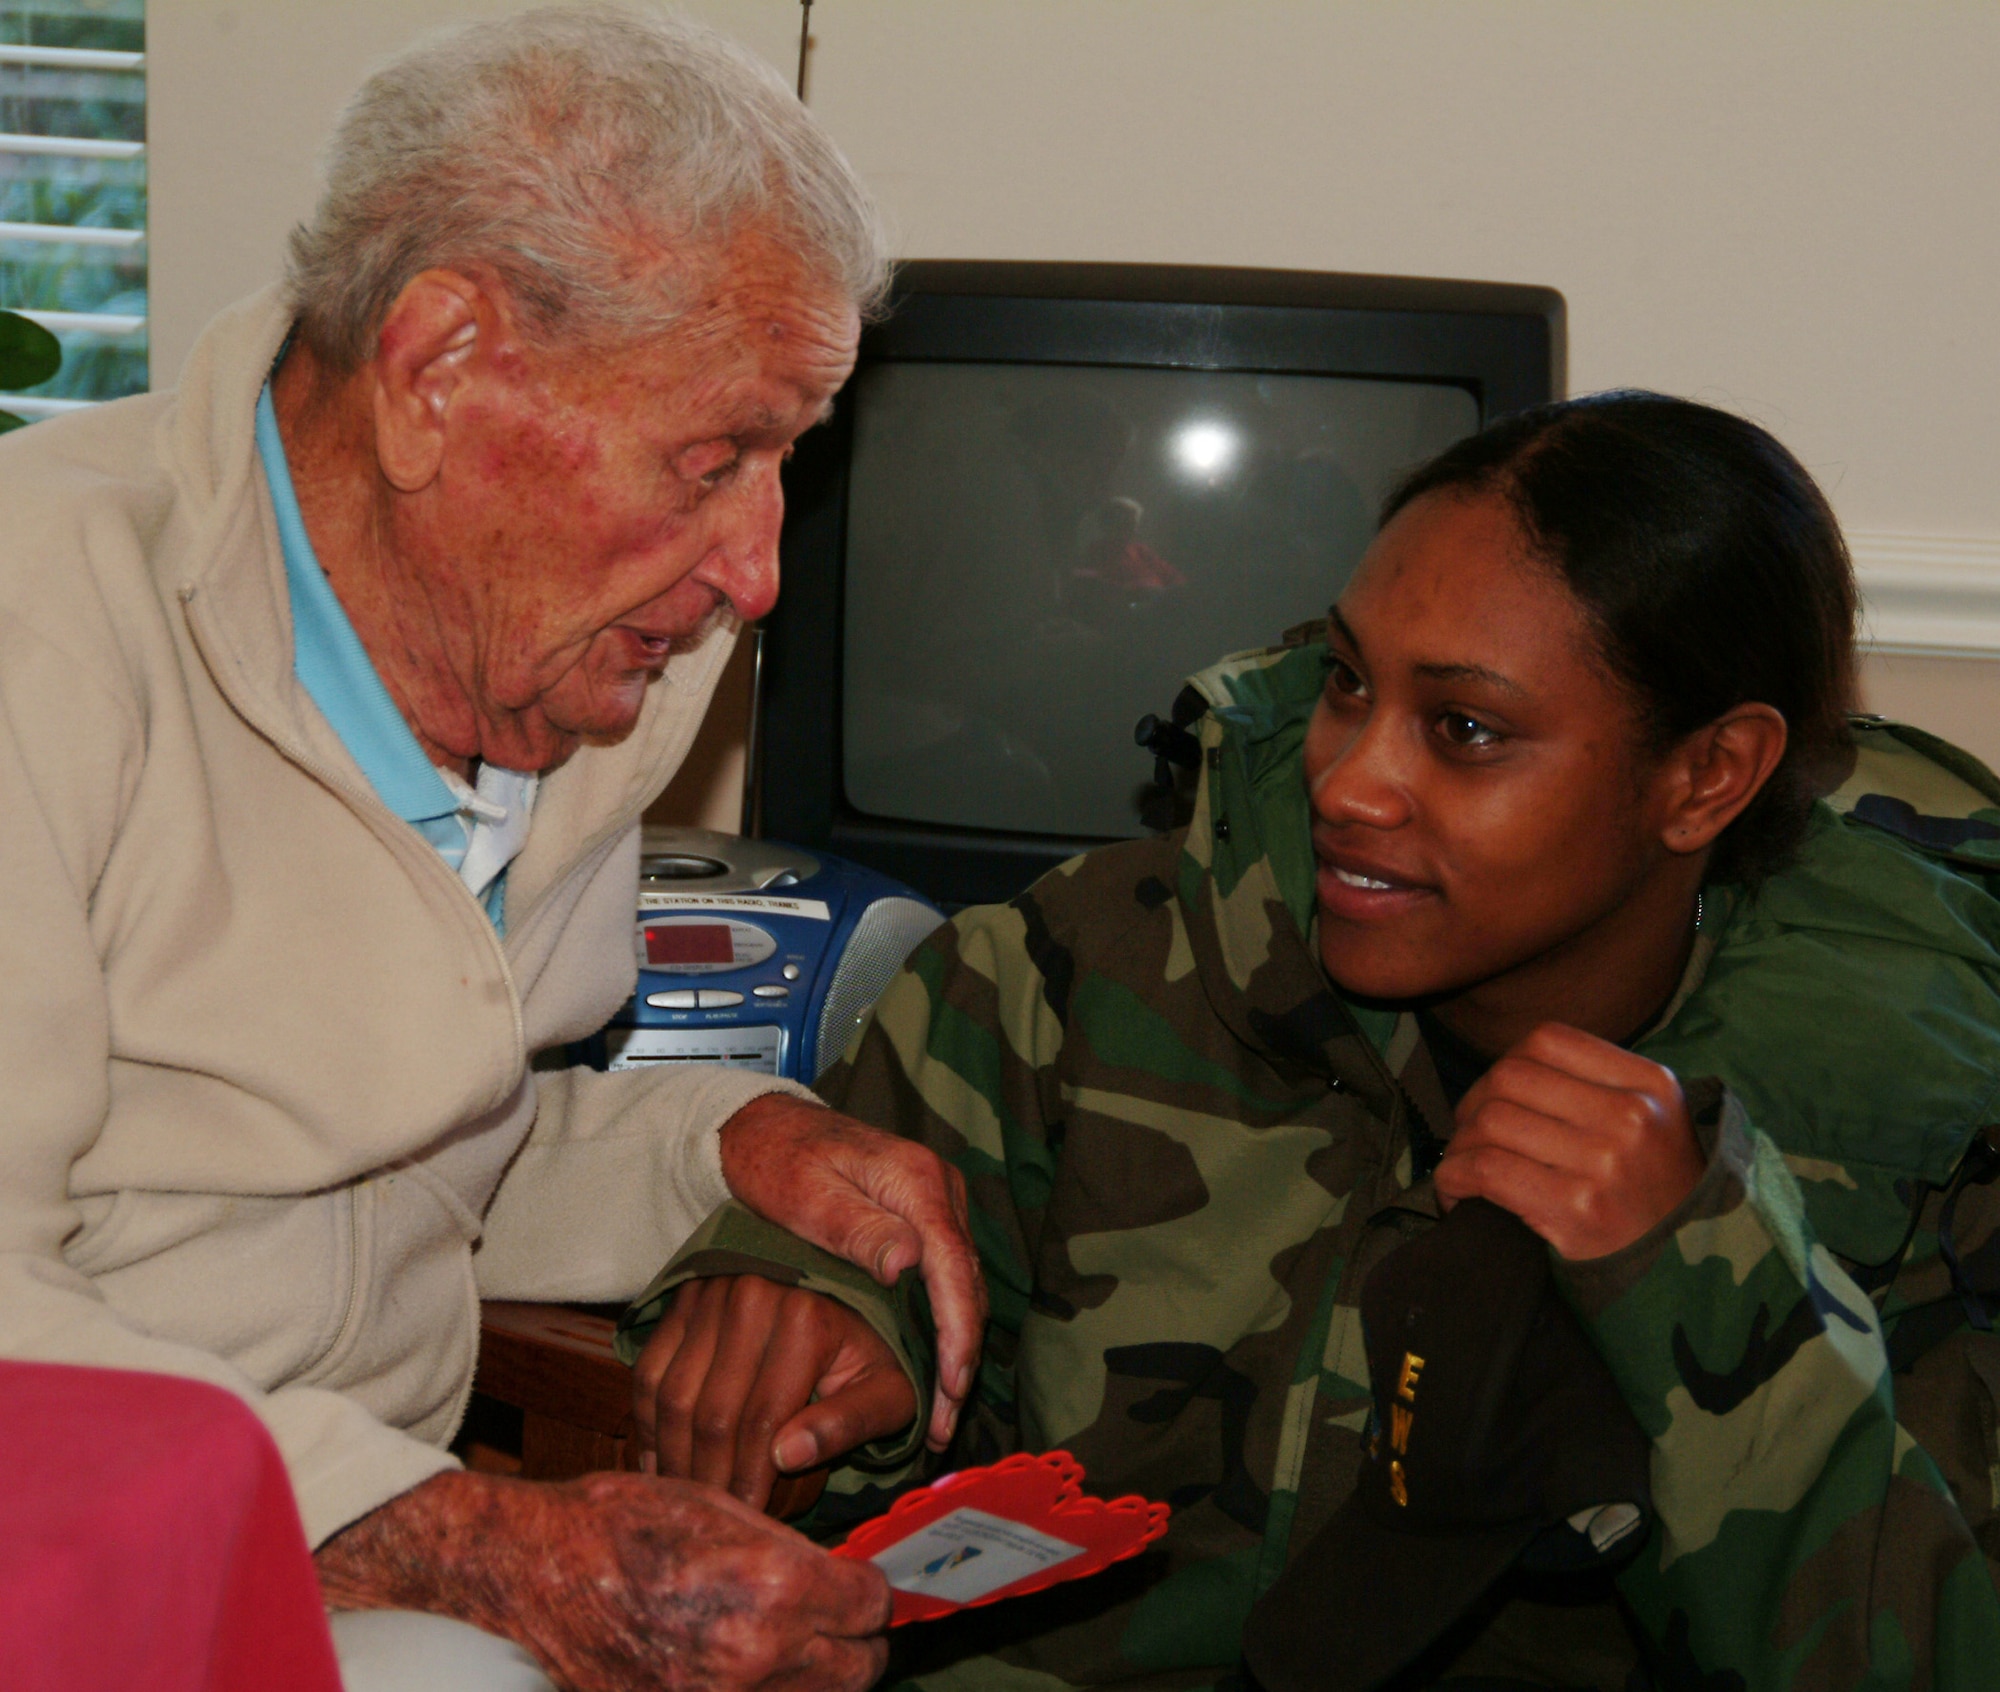 Senior Airman Dietta Morris, 68th Electronic Warfare Squadron, listens to George, a 99-year-old Army veteran, Feb. 14 at the Sterling House in Niceville Fla.  More than 50 active duty 53d Wing members presented vets in nursing homes around the local area with cards and candy on Valentine's Day.  U.S. Air Force photo by Master Sgt. Andrew Leonhard.  